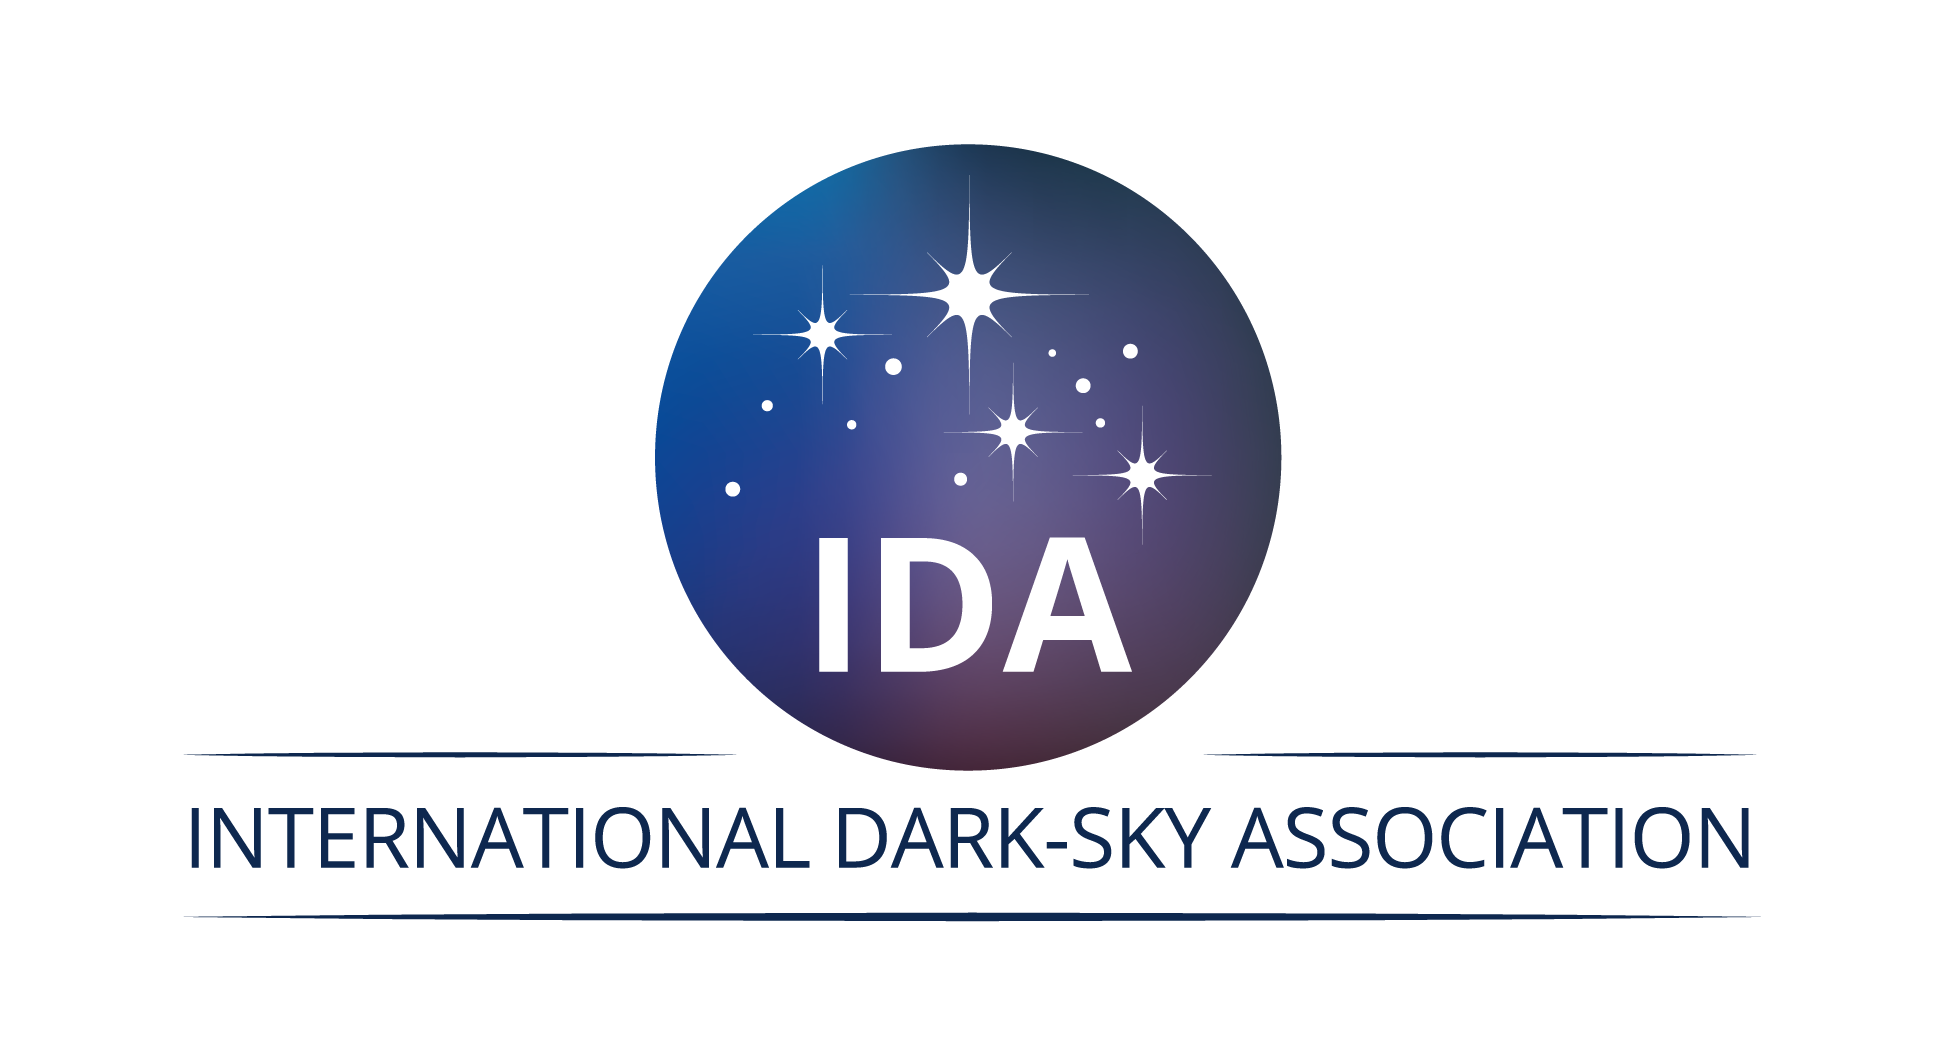 The logo for the International Dark-Sky Association consists of a dark blue circle with scattered white stars. At the bottom, the letters IDA are in white capitals.